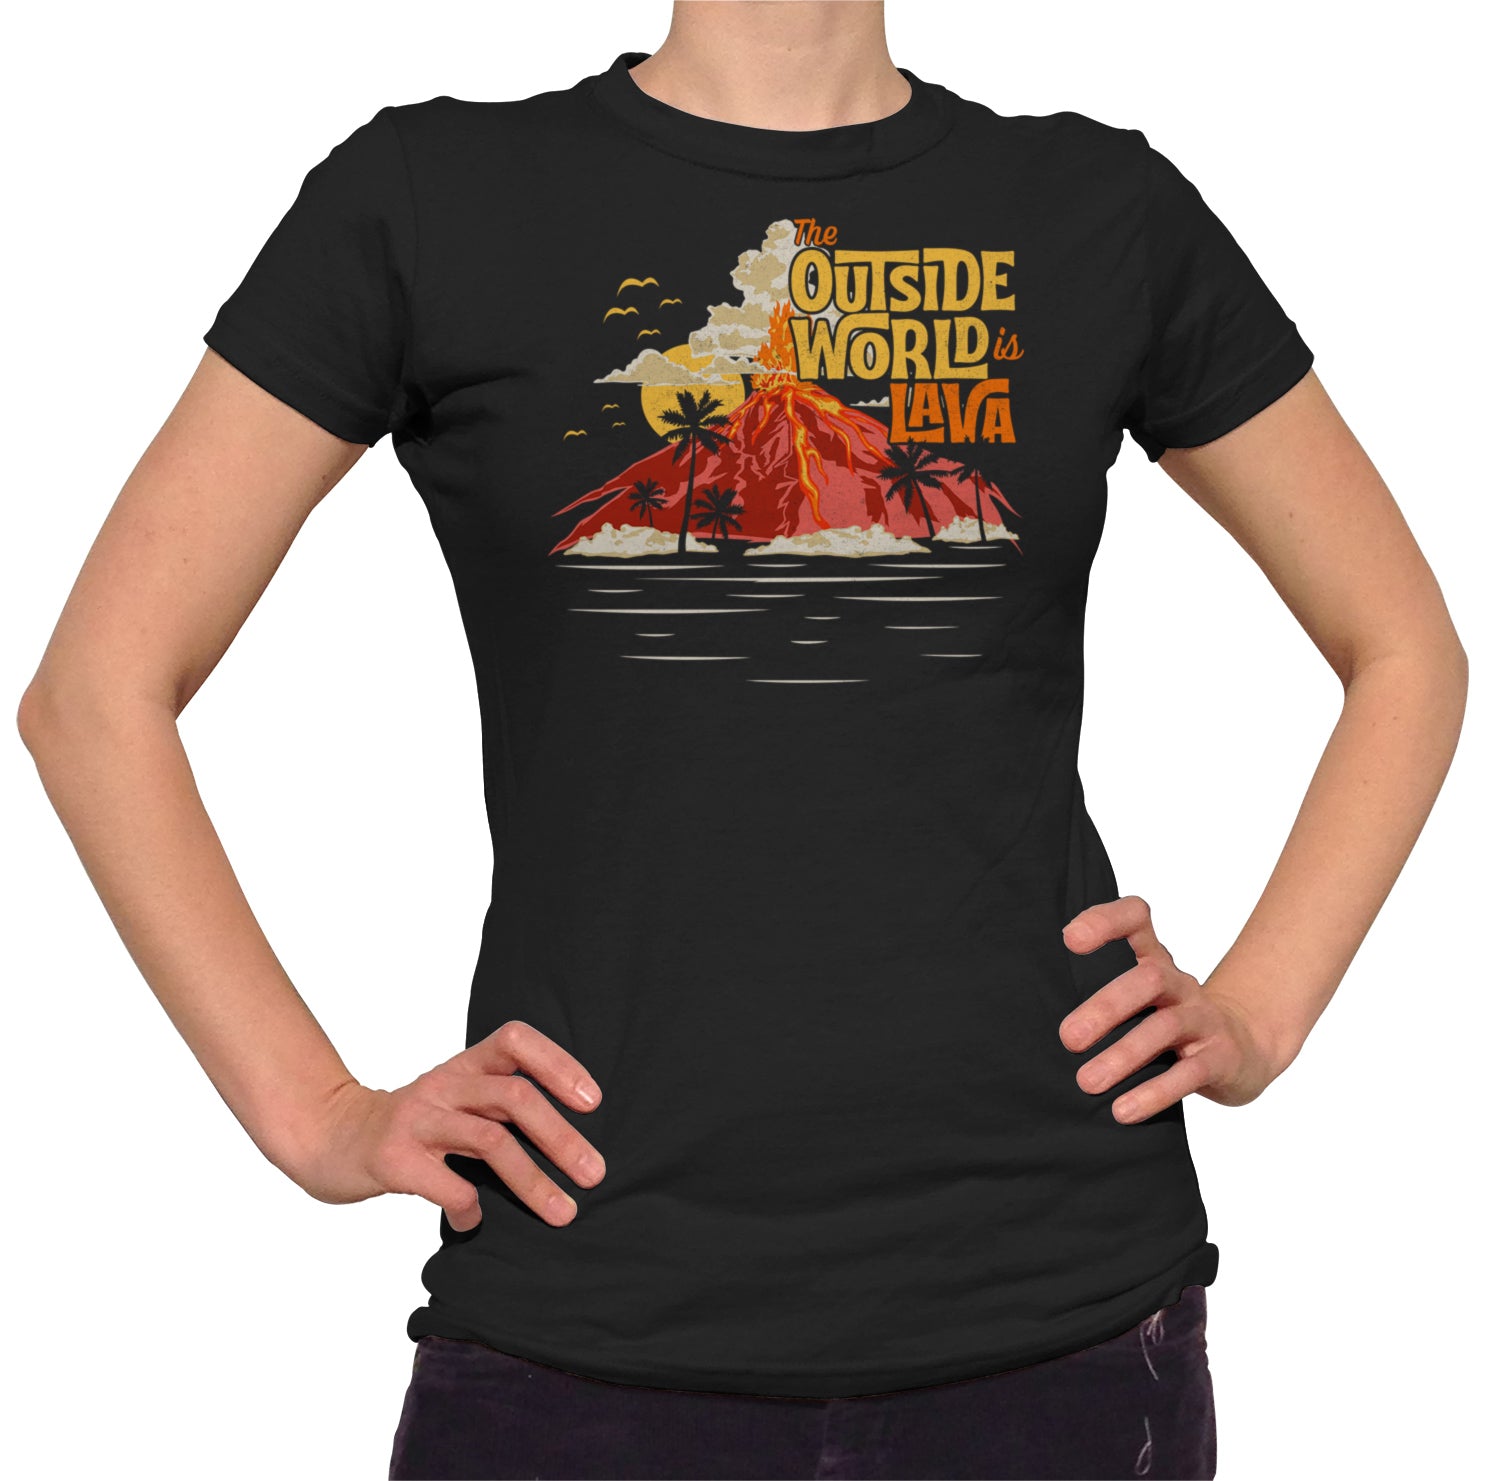 Women's The Outside World is Lava T-Shirt